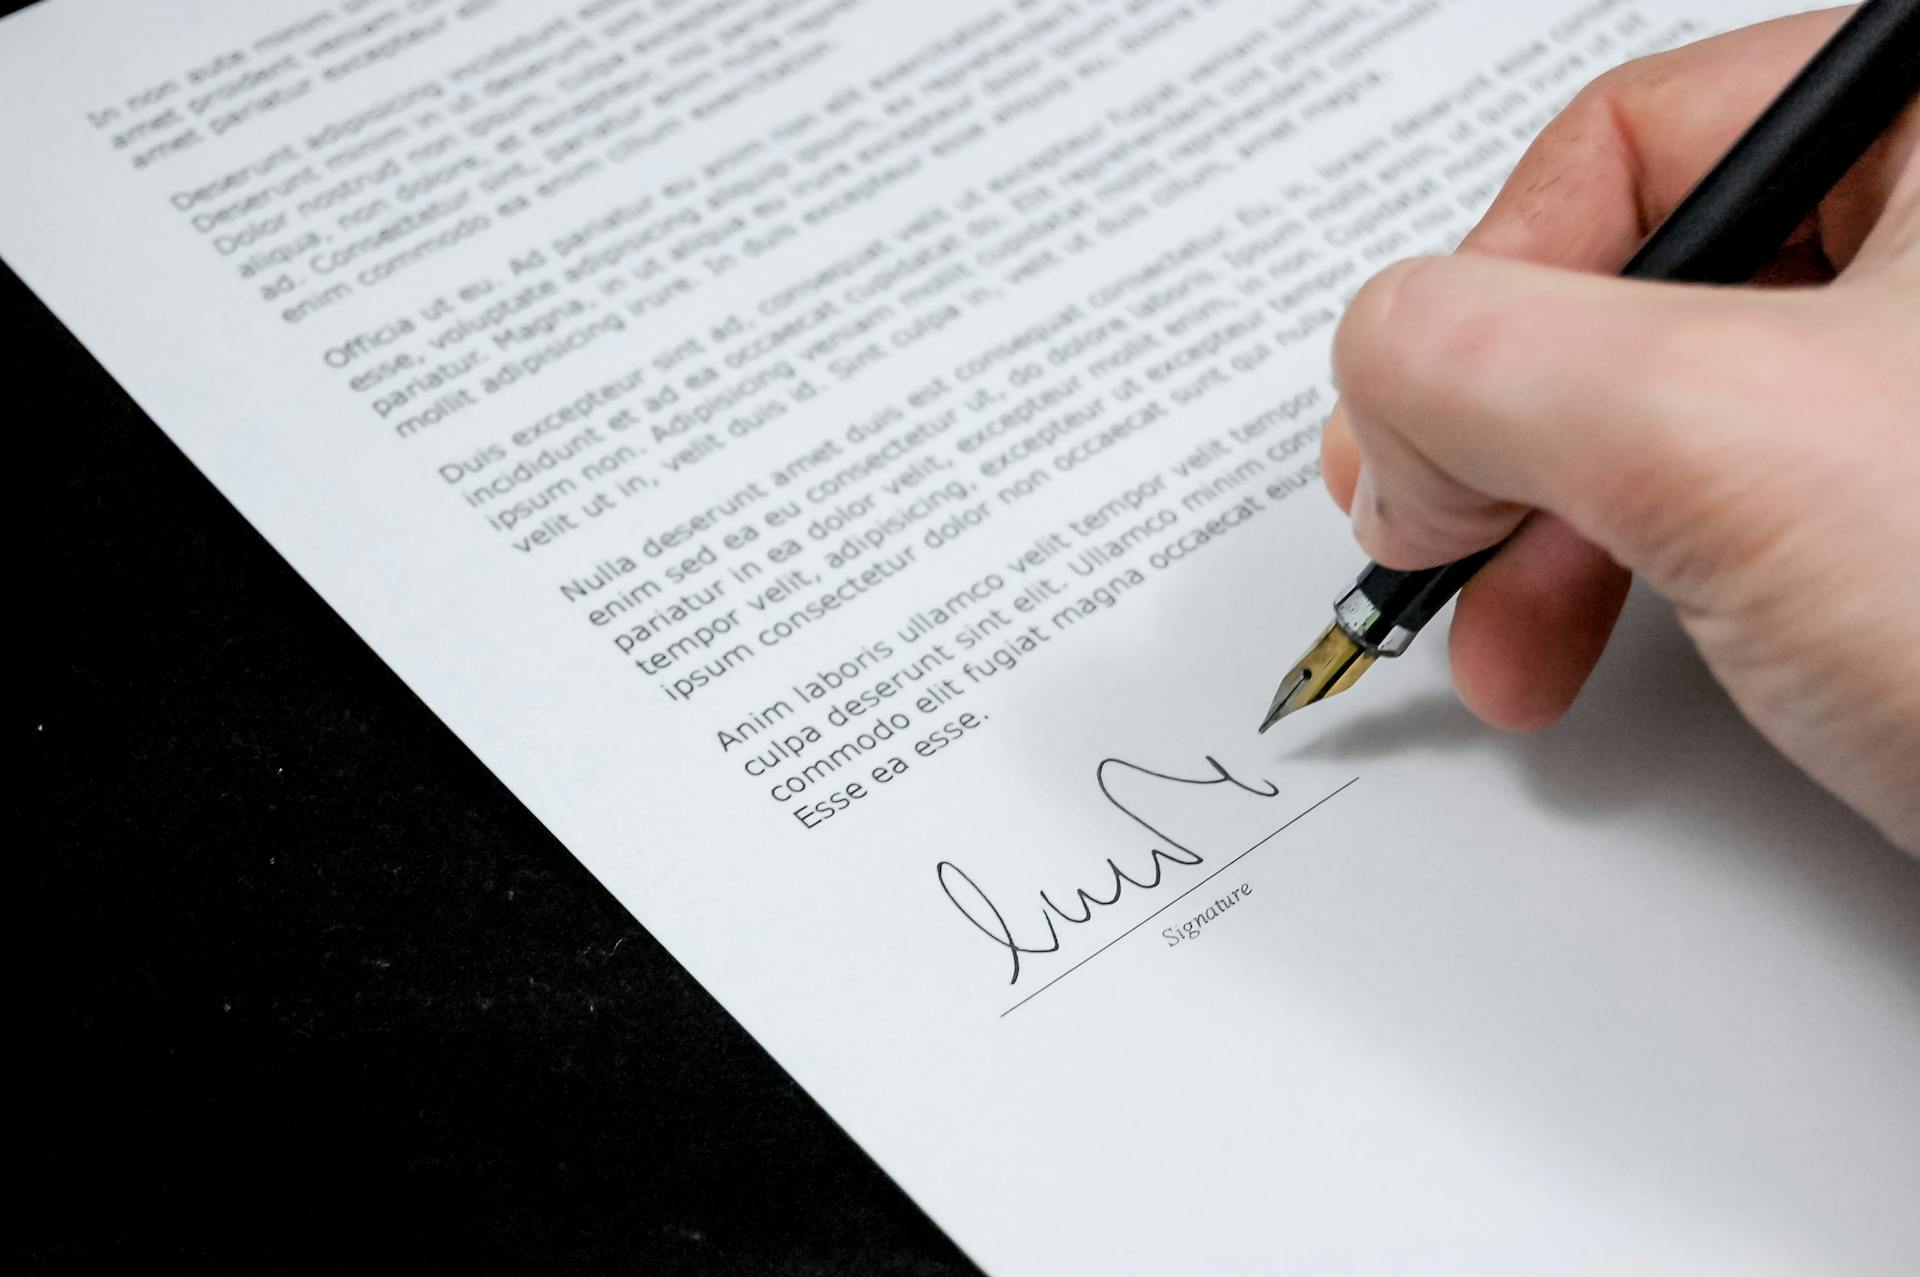 A person signing a written agreement | Source: Pexels